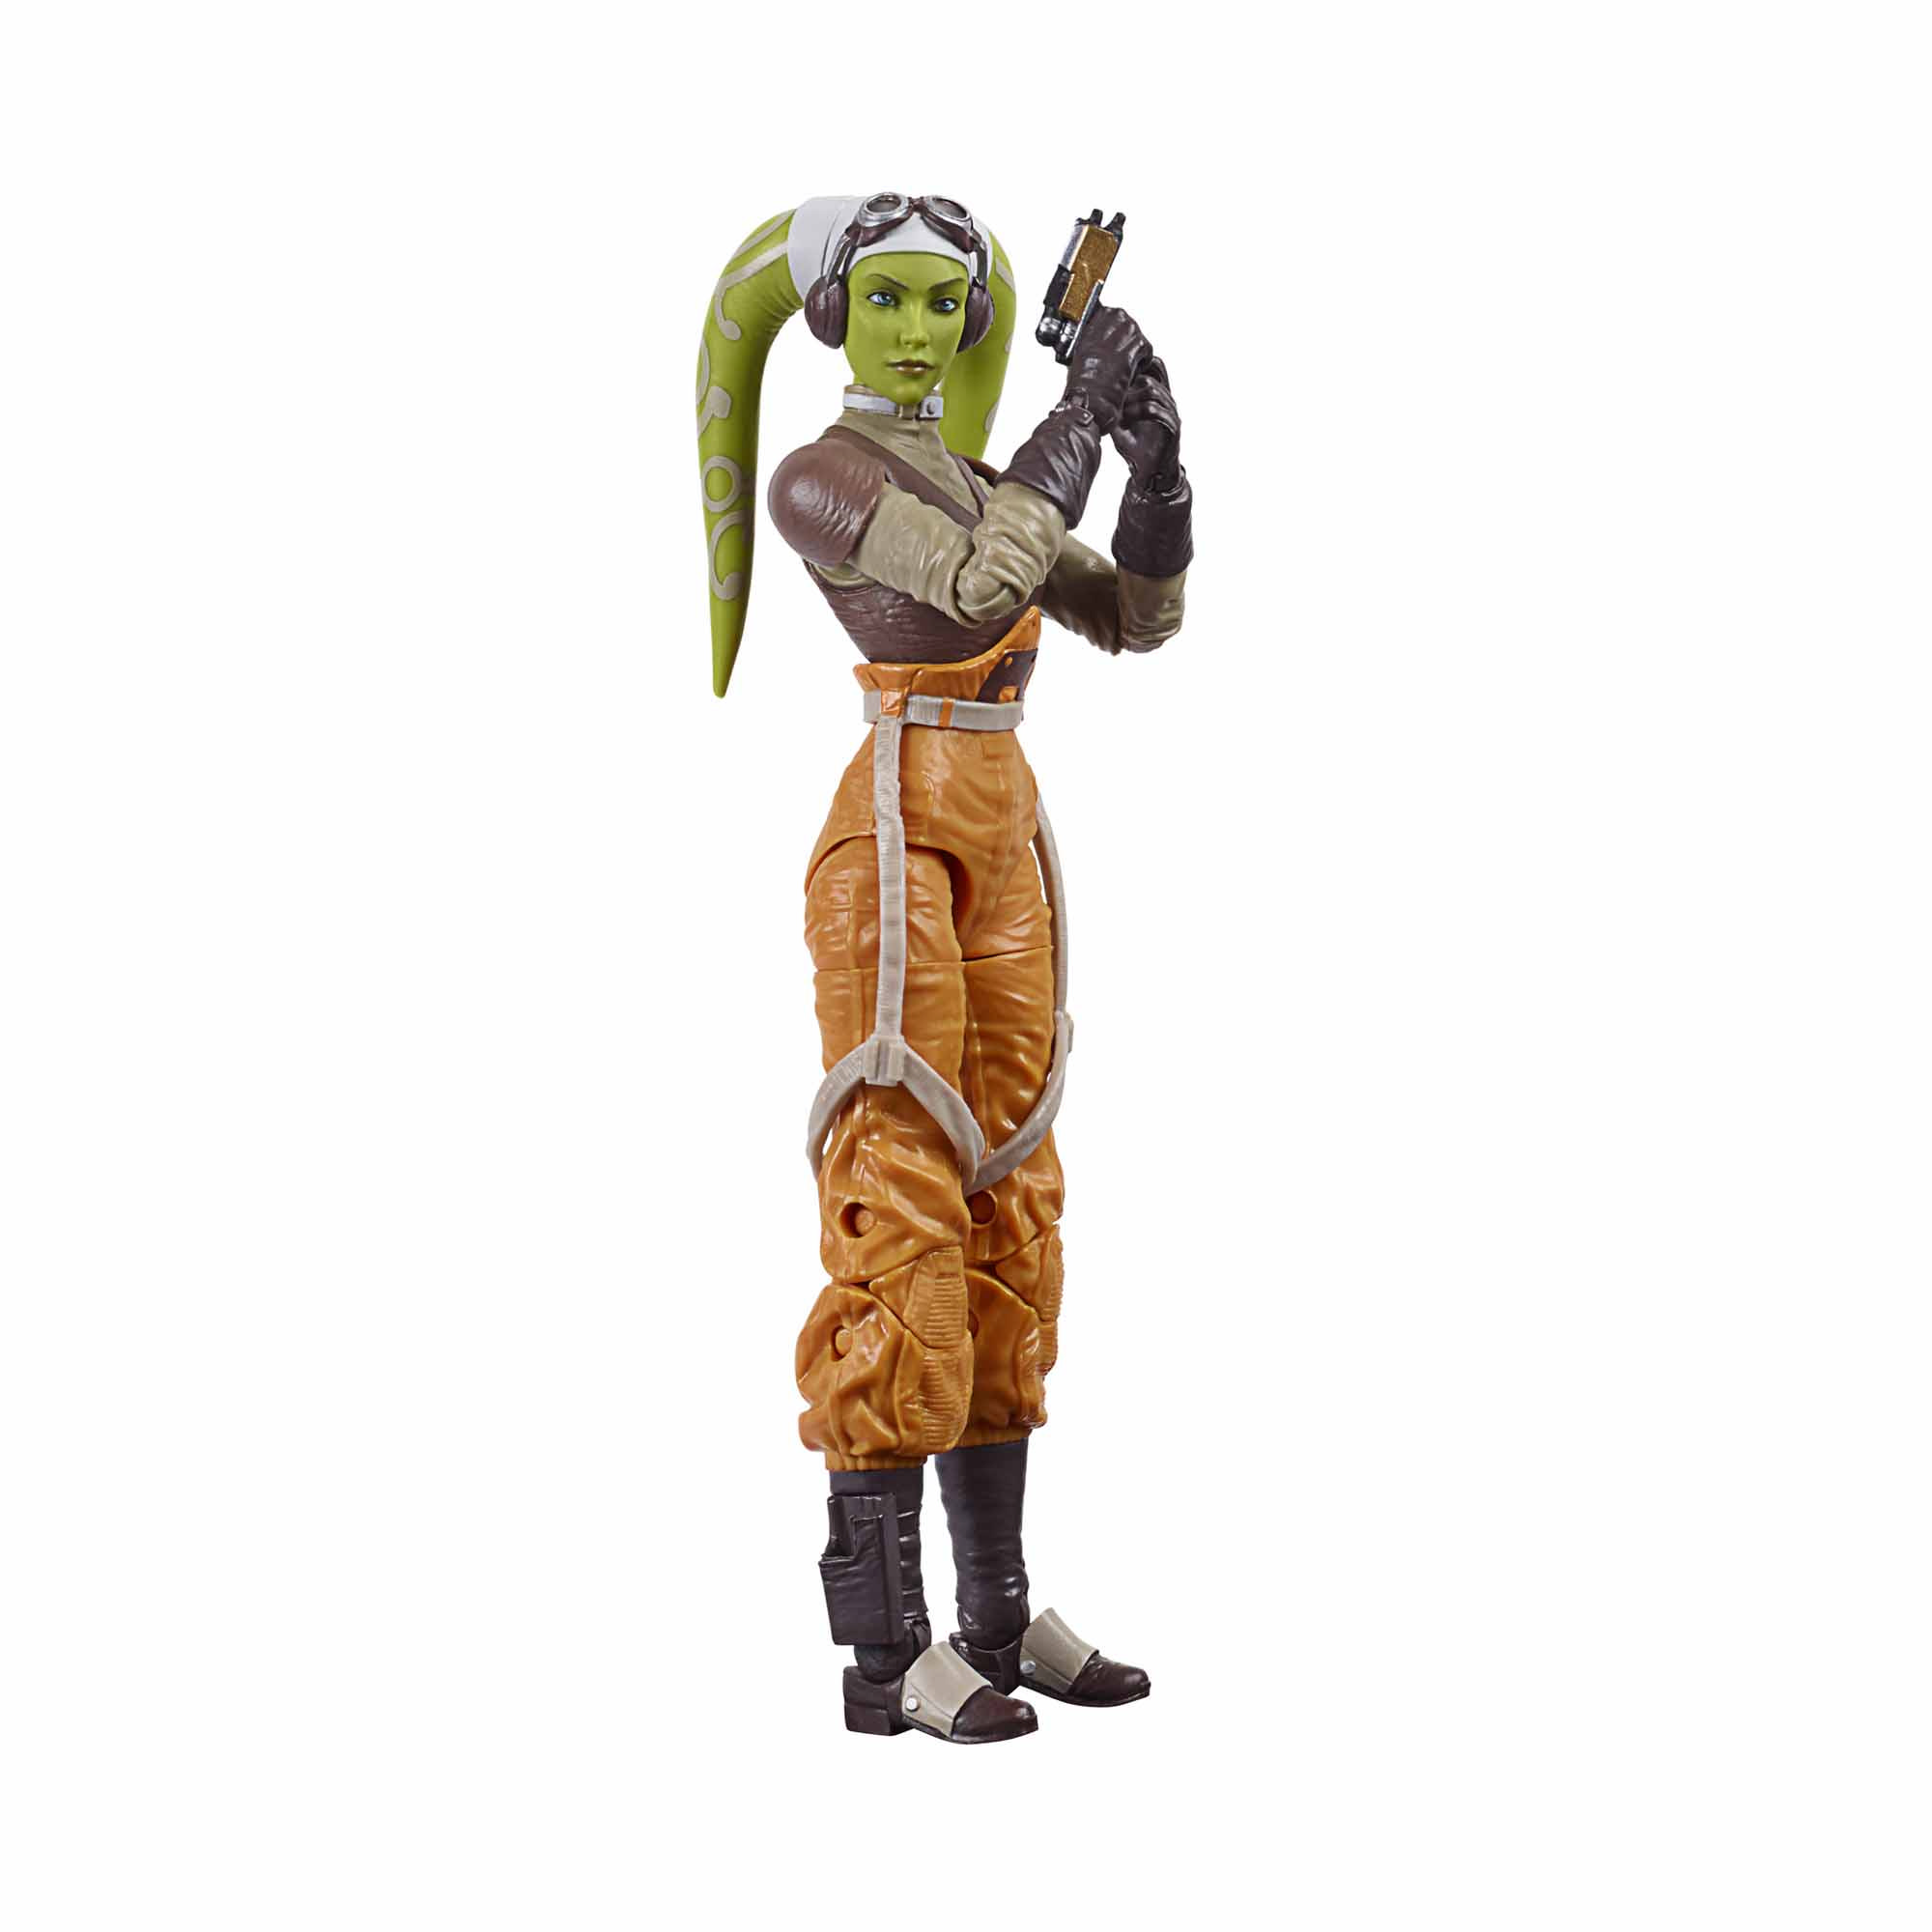 Kids Ages 4 and Up for sale online Star Wars The Black Series Hera Syndulla Toy 6-Inch-Scale Star Wars Rebels Collectible Action Figure